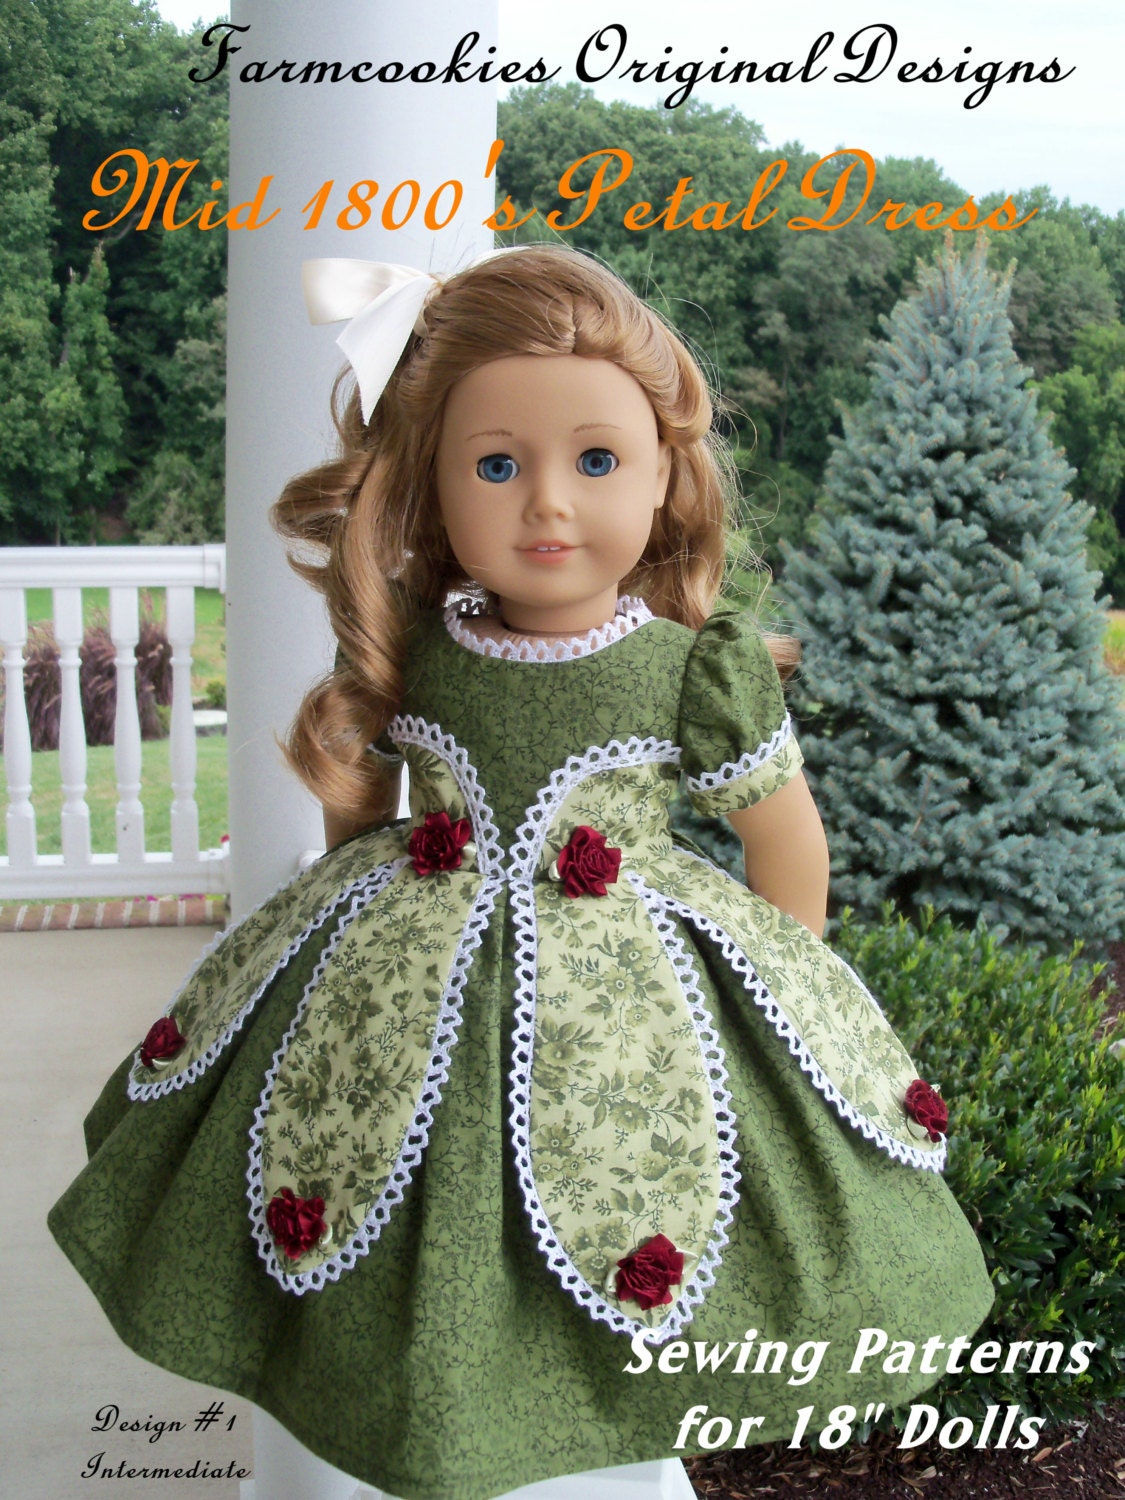 Printed Pattern for American Girl Marie Grace or Cecile 1850's Petal Gown / Sewing Pattern for 18" Dolls